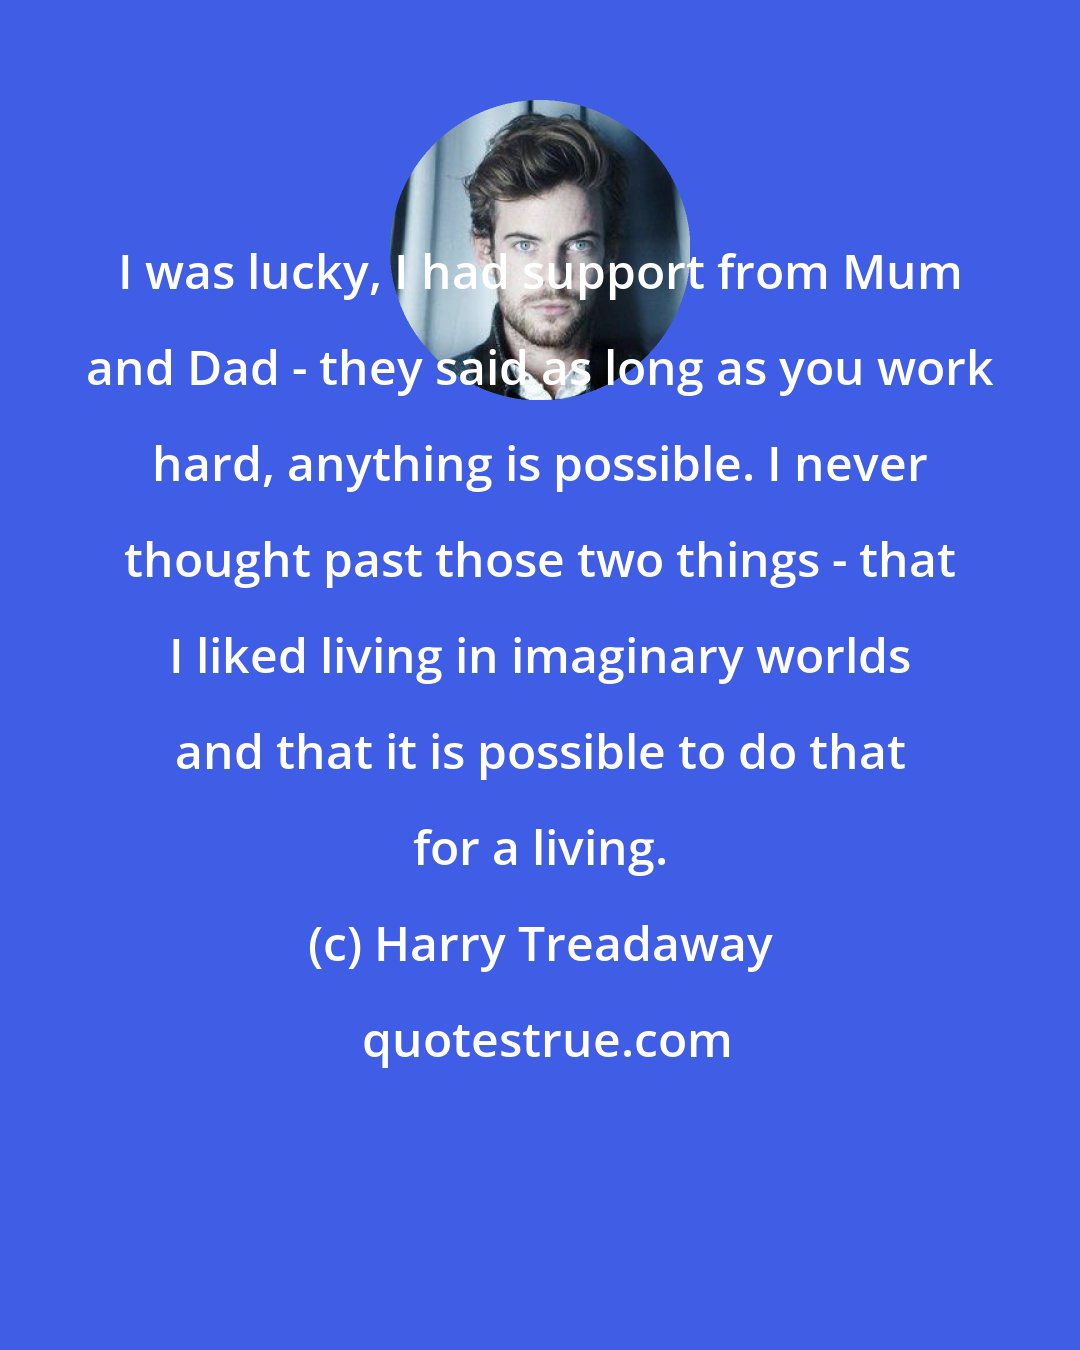 Harry Treadaway: I was lucky, I had support from Mum and Dad - they said as long as you work hard, anything is possible. I never thought past those two things - that I liked living in imaginary worlds and that it is possible to do that for a living.